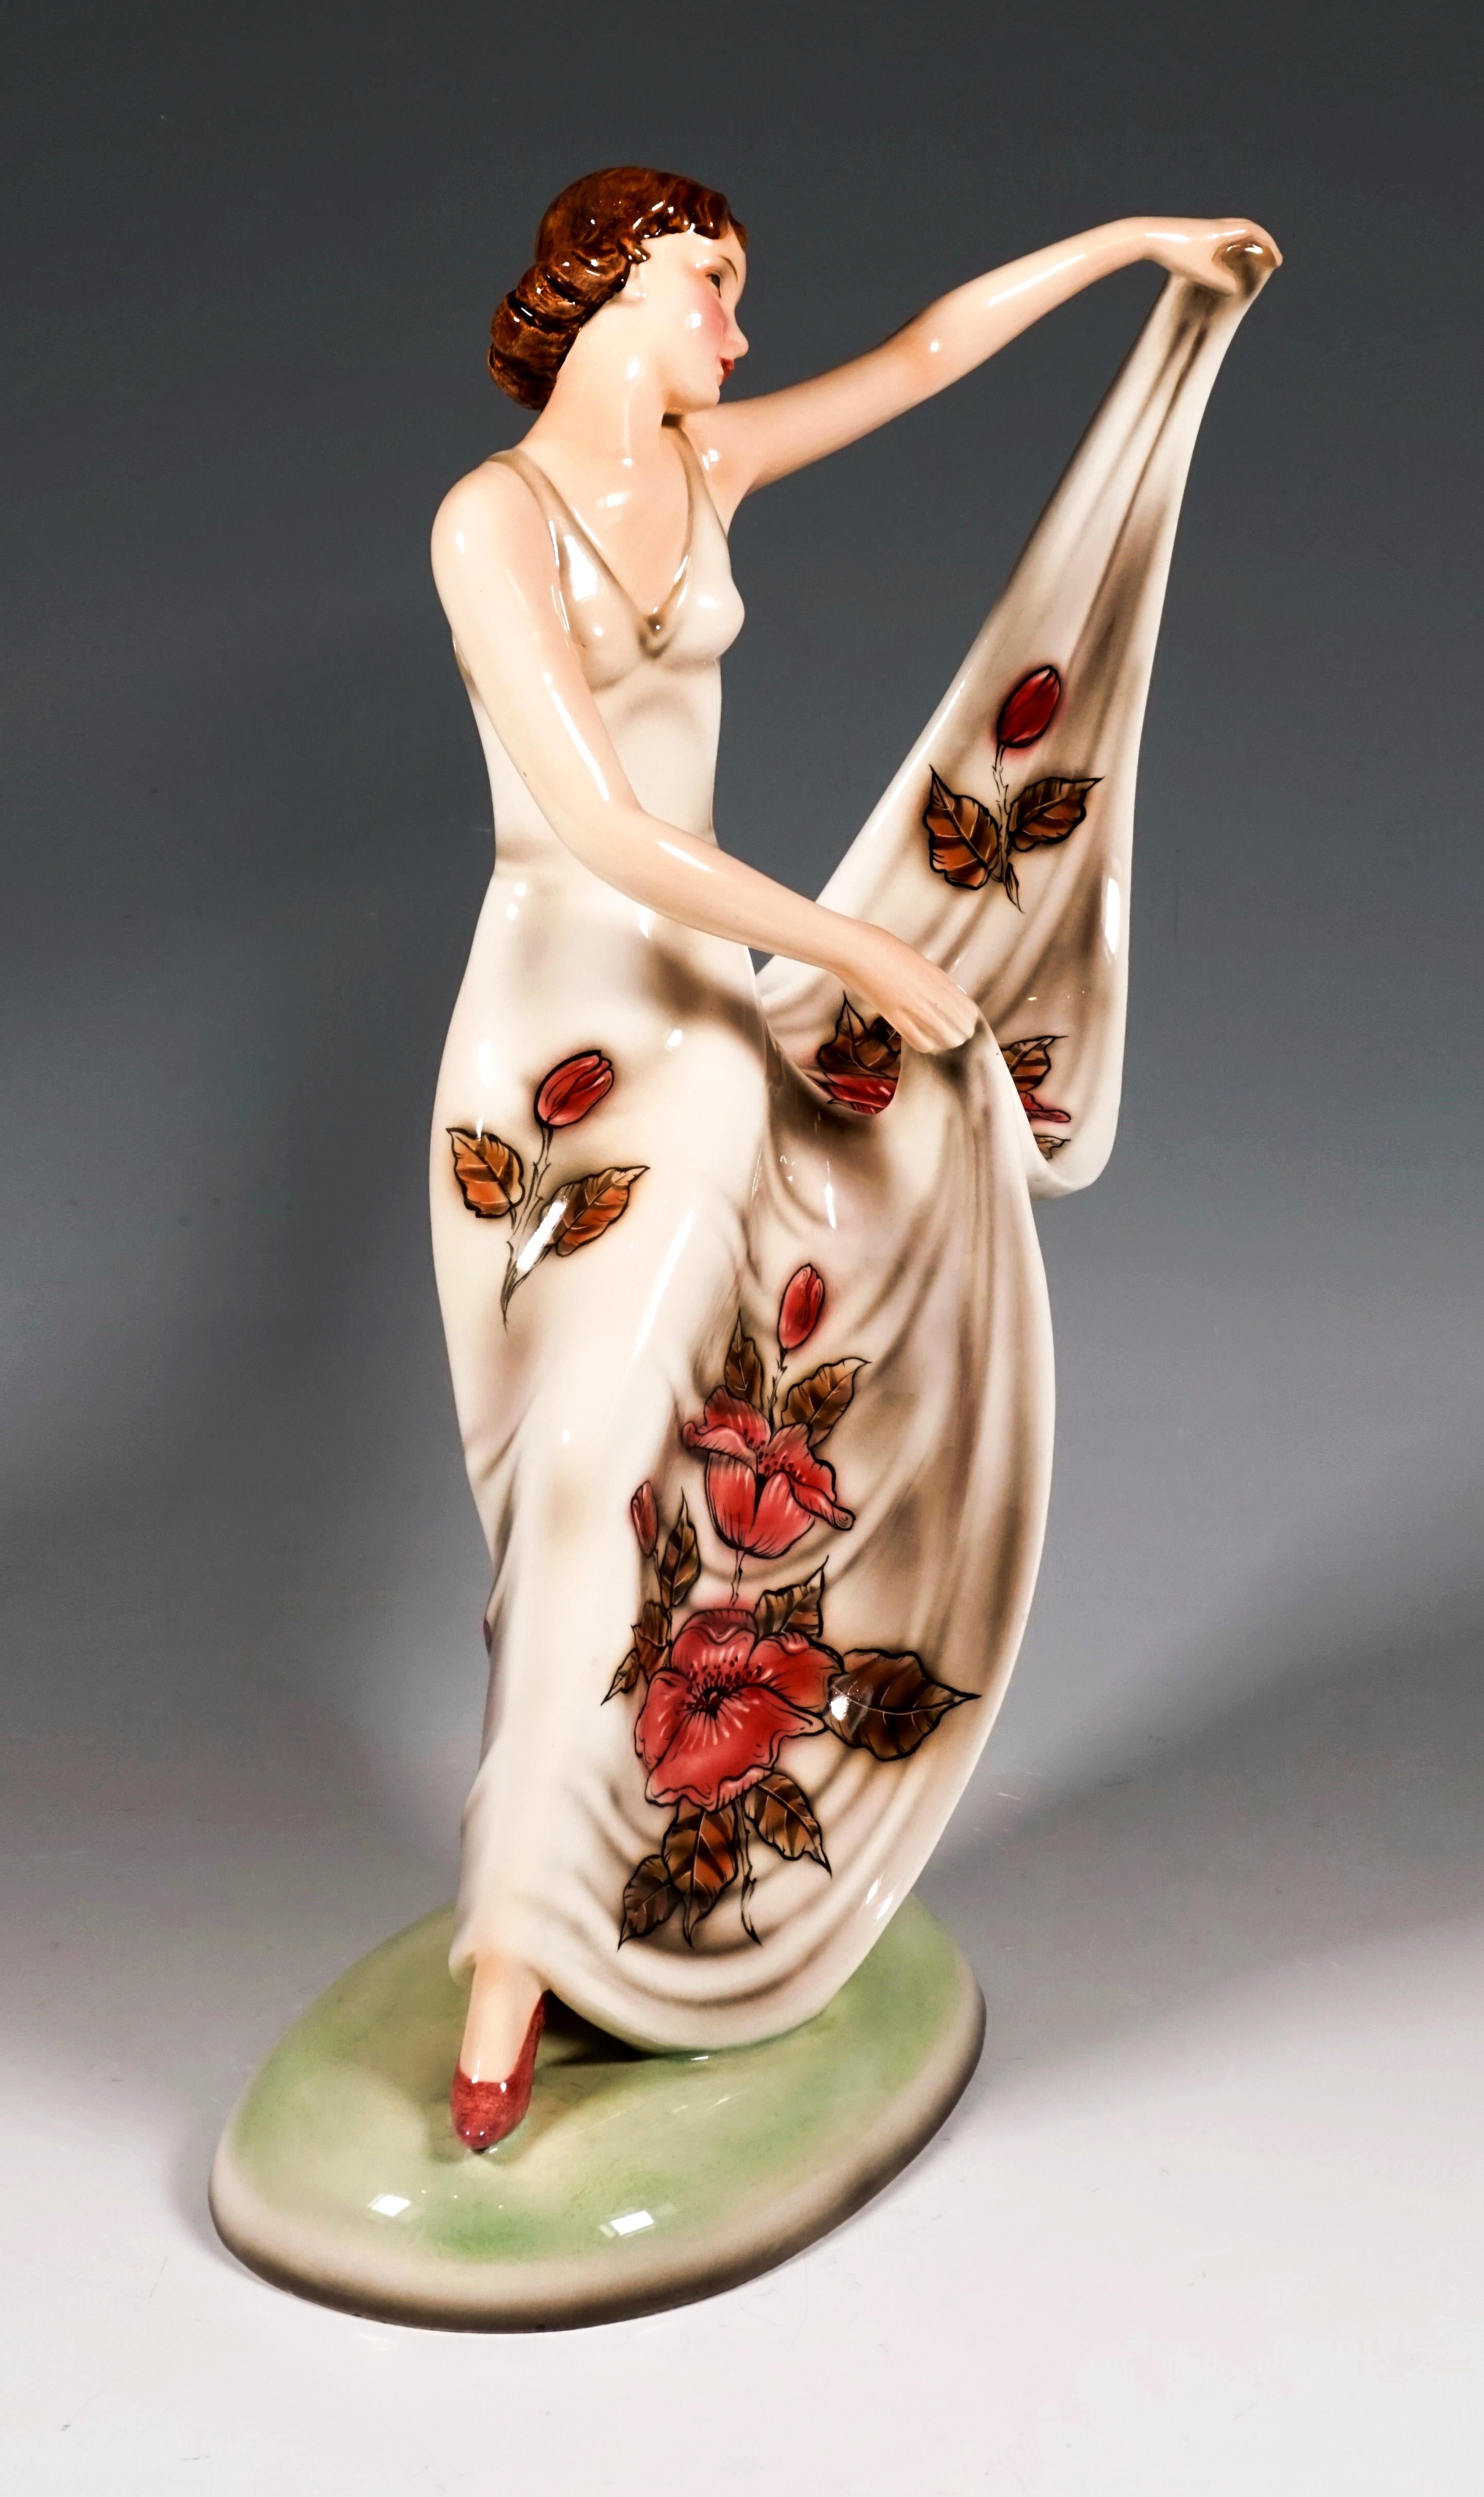 Graceful, striding dancer with torso turned to the left and head tilted slightly to the side, holding the hem of her floor-length, wide, cream-colored dance dress with rose-colored floral decoration up to the side.
On a slightly cambered oval base